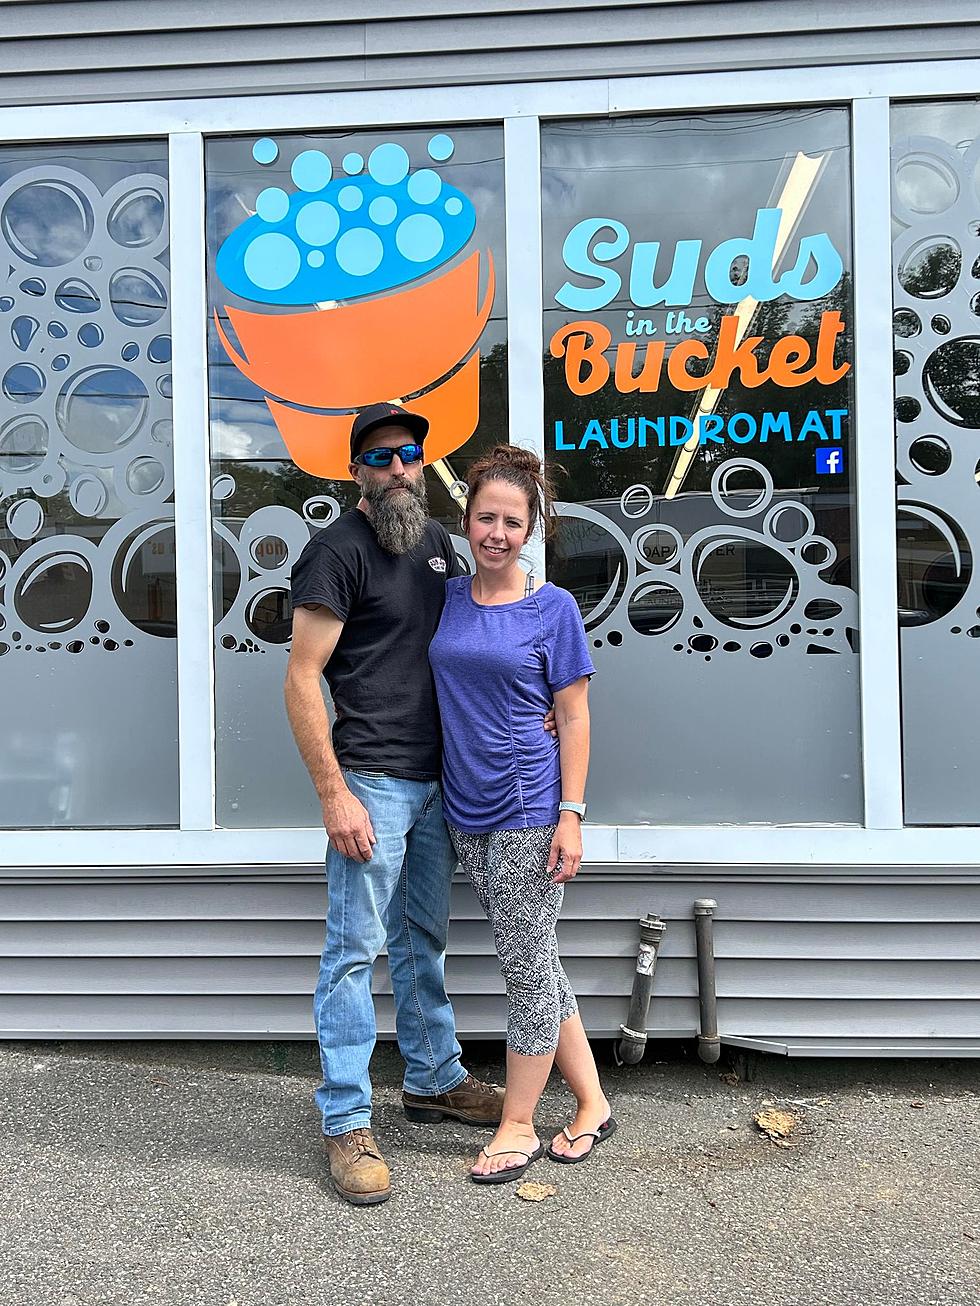 Brewer Laundromat Suds in the Bucket Expands to Dover Foxcroft